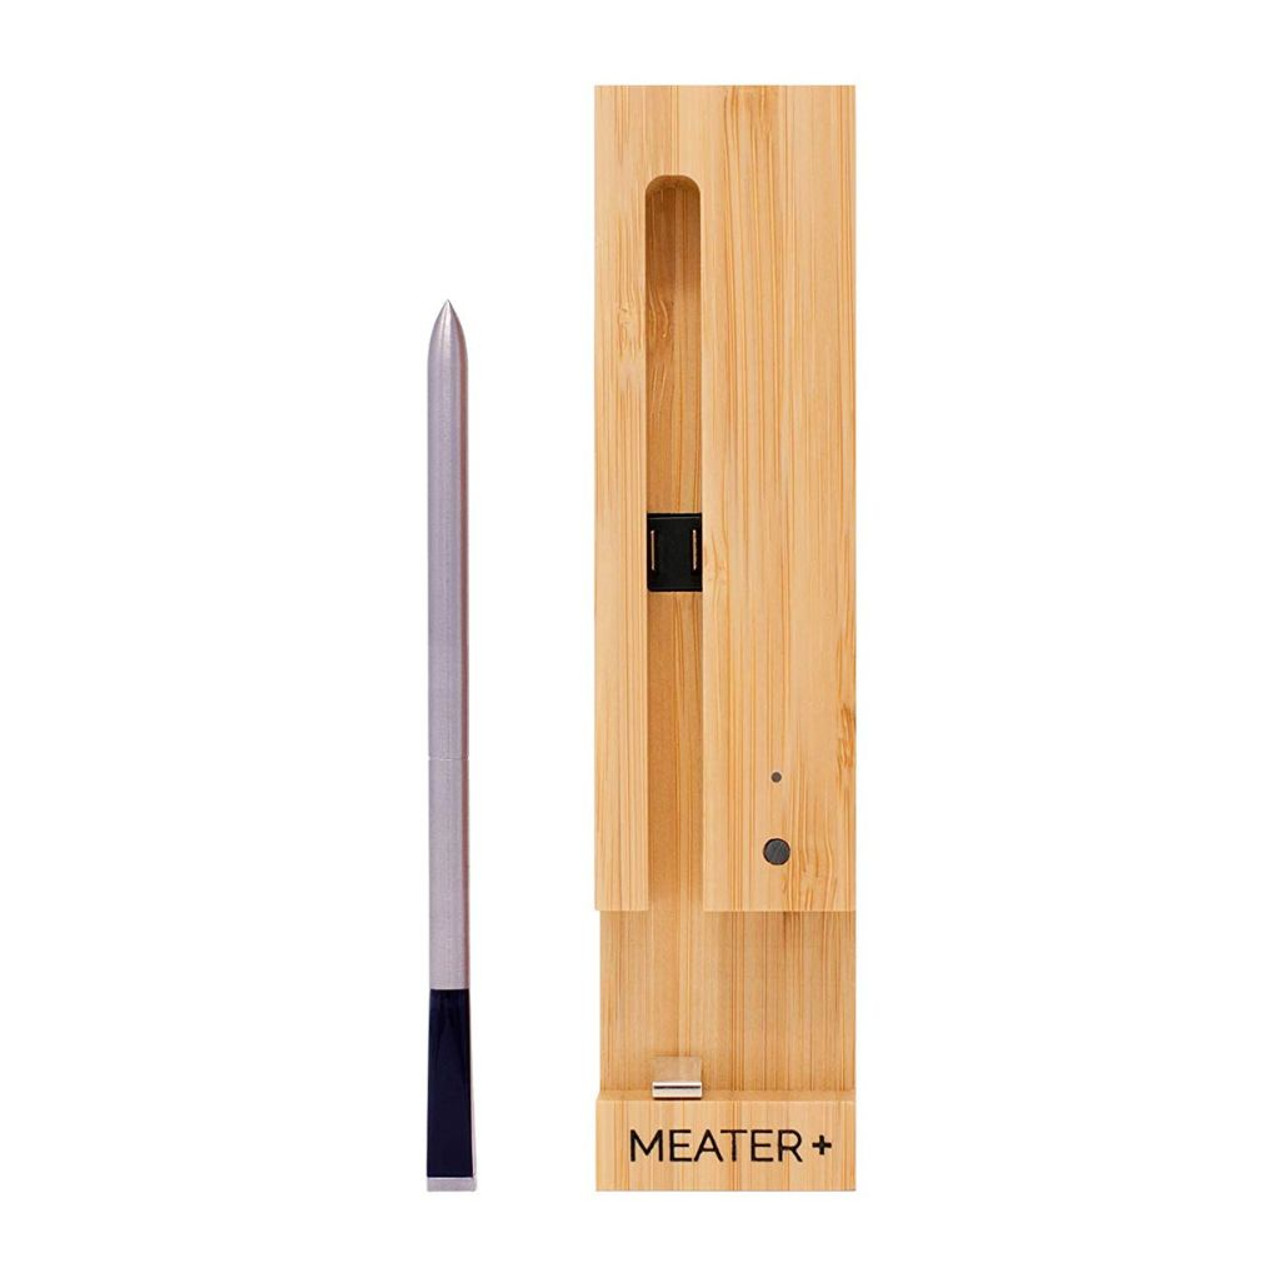 MEATER® Plus Wireless Smart Meat Thermometer product image